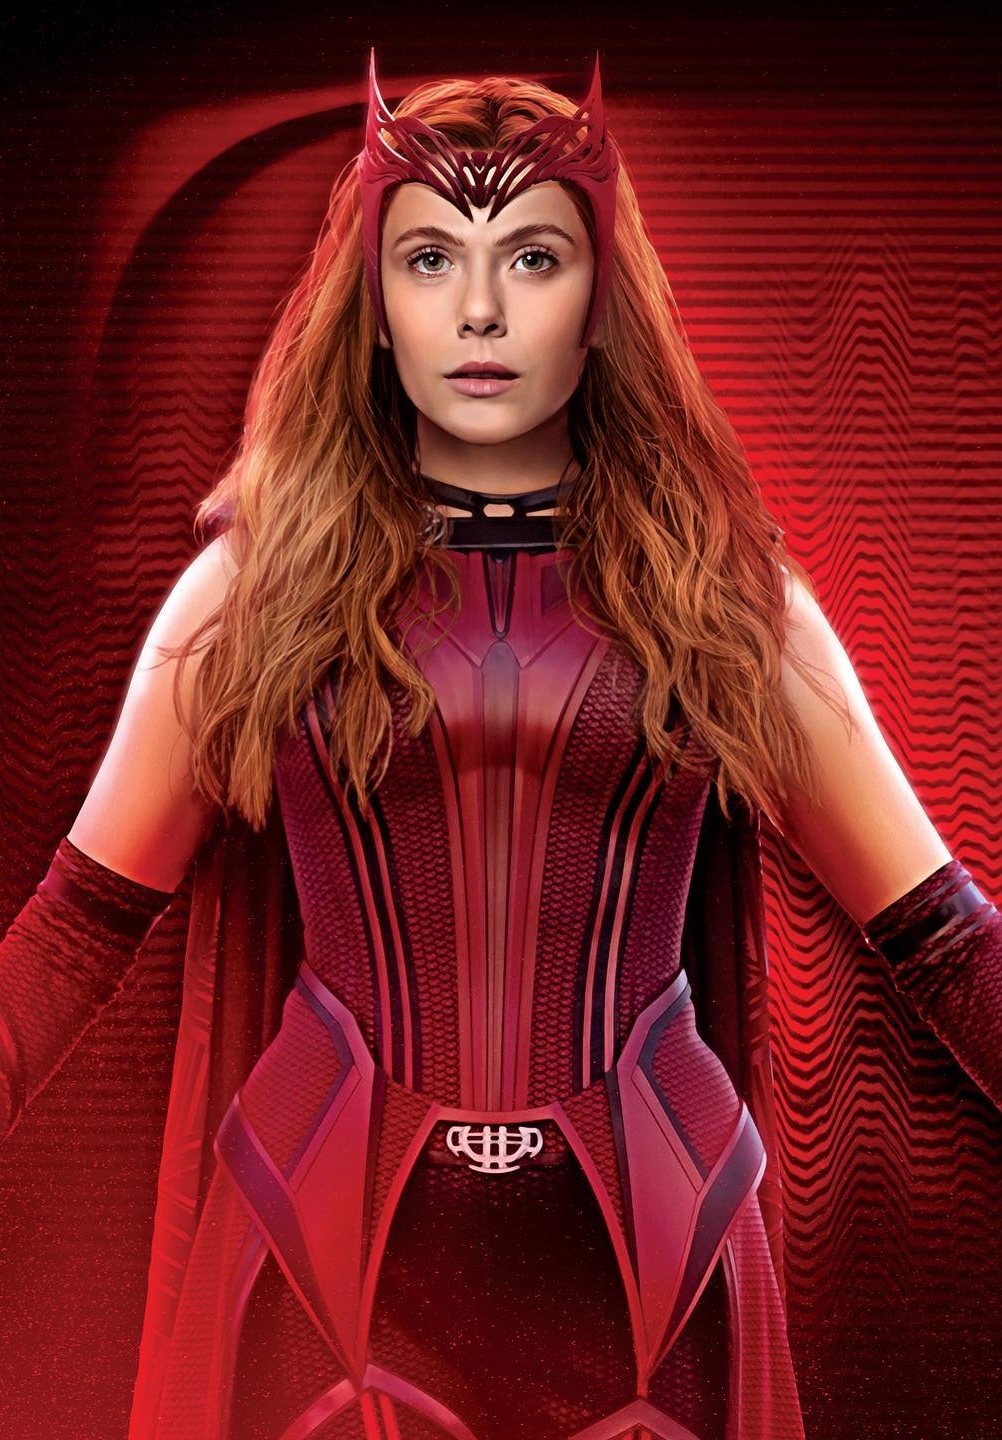 Scarlet Witch, Marvel Cinematic Universe Wiki